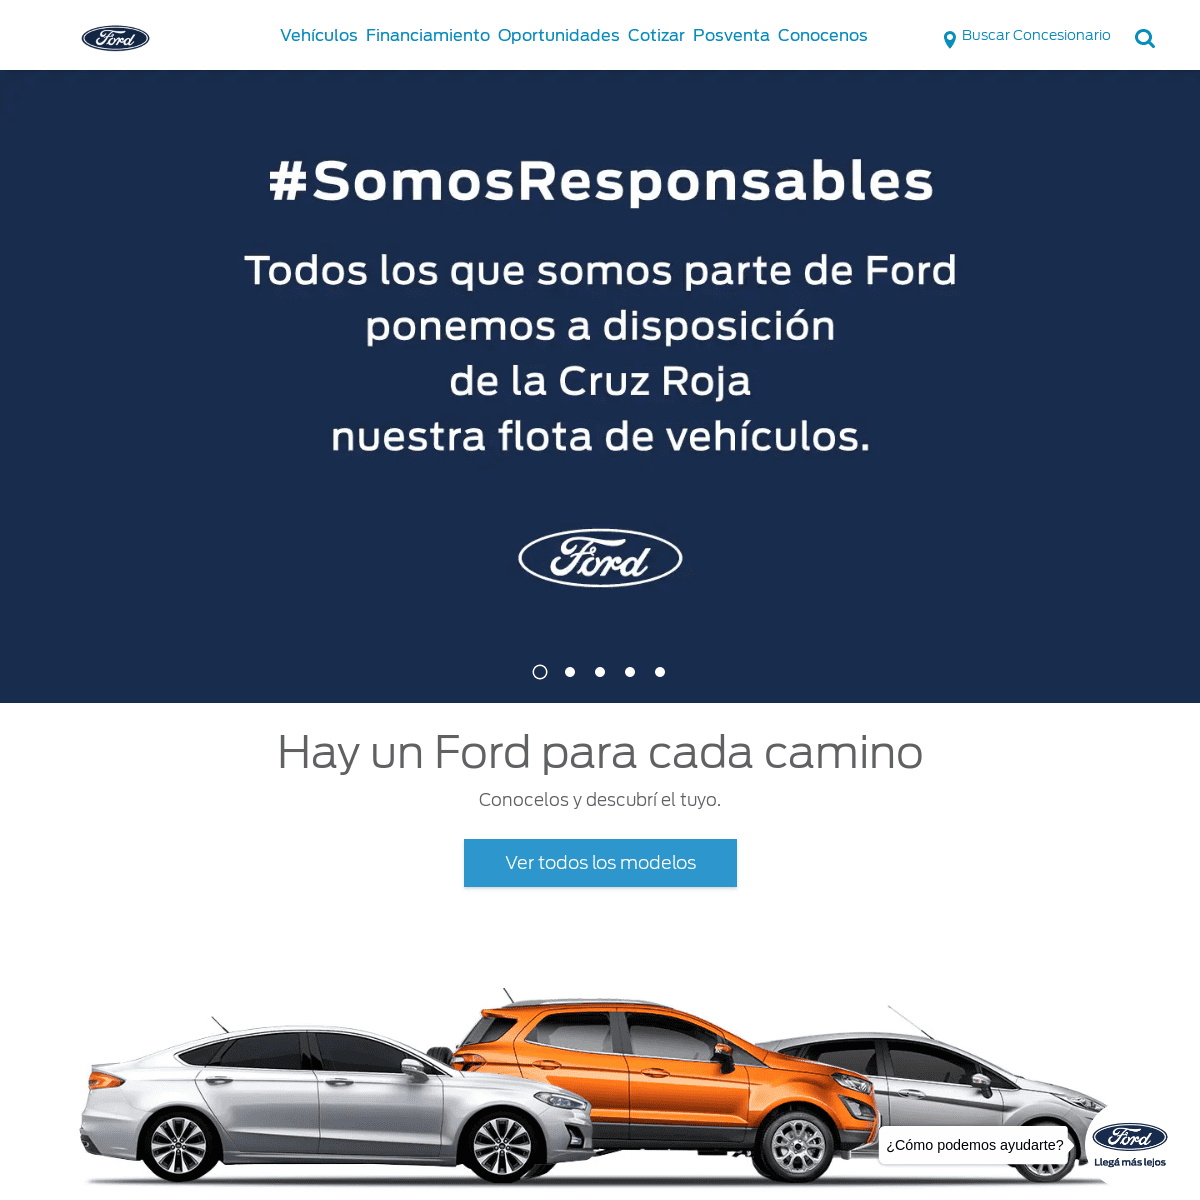 A complete backup of ford.com.ar